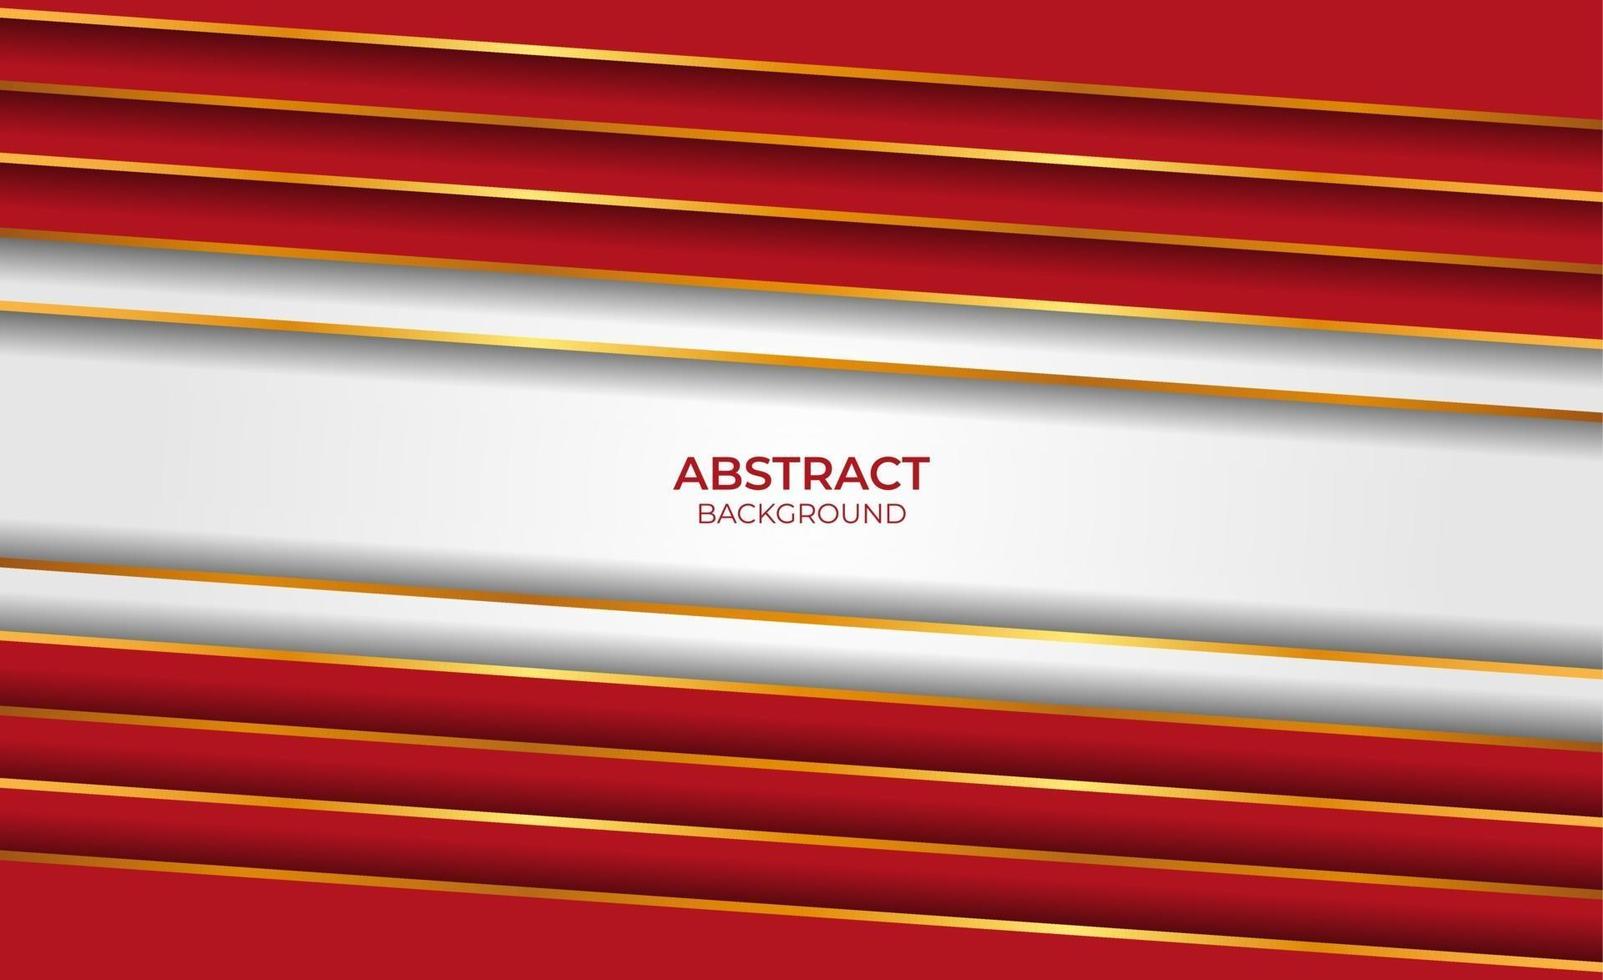 Background design gold and red vector